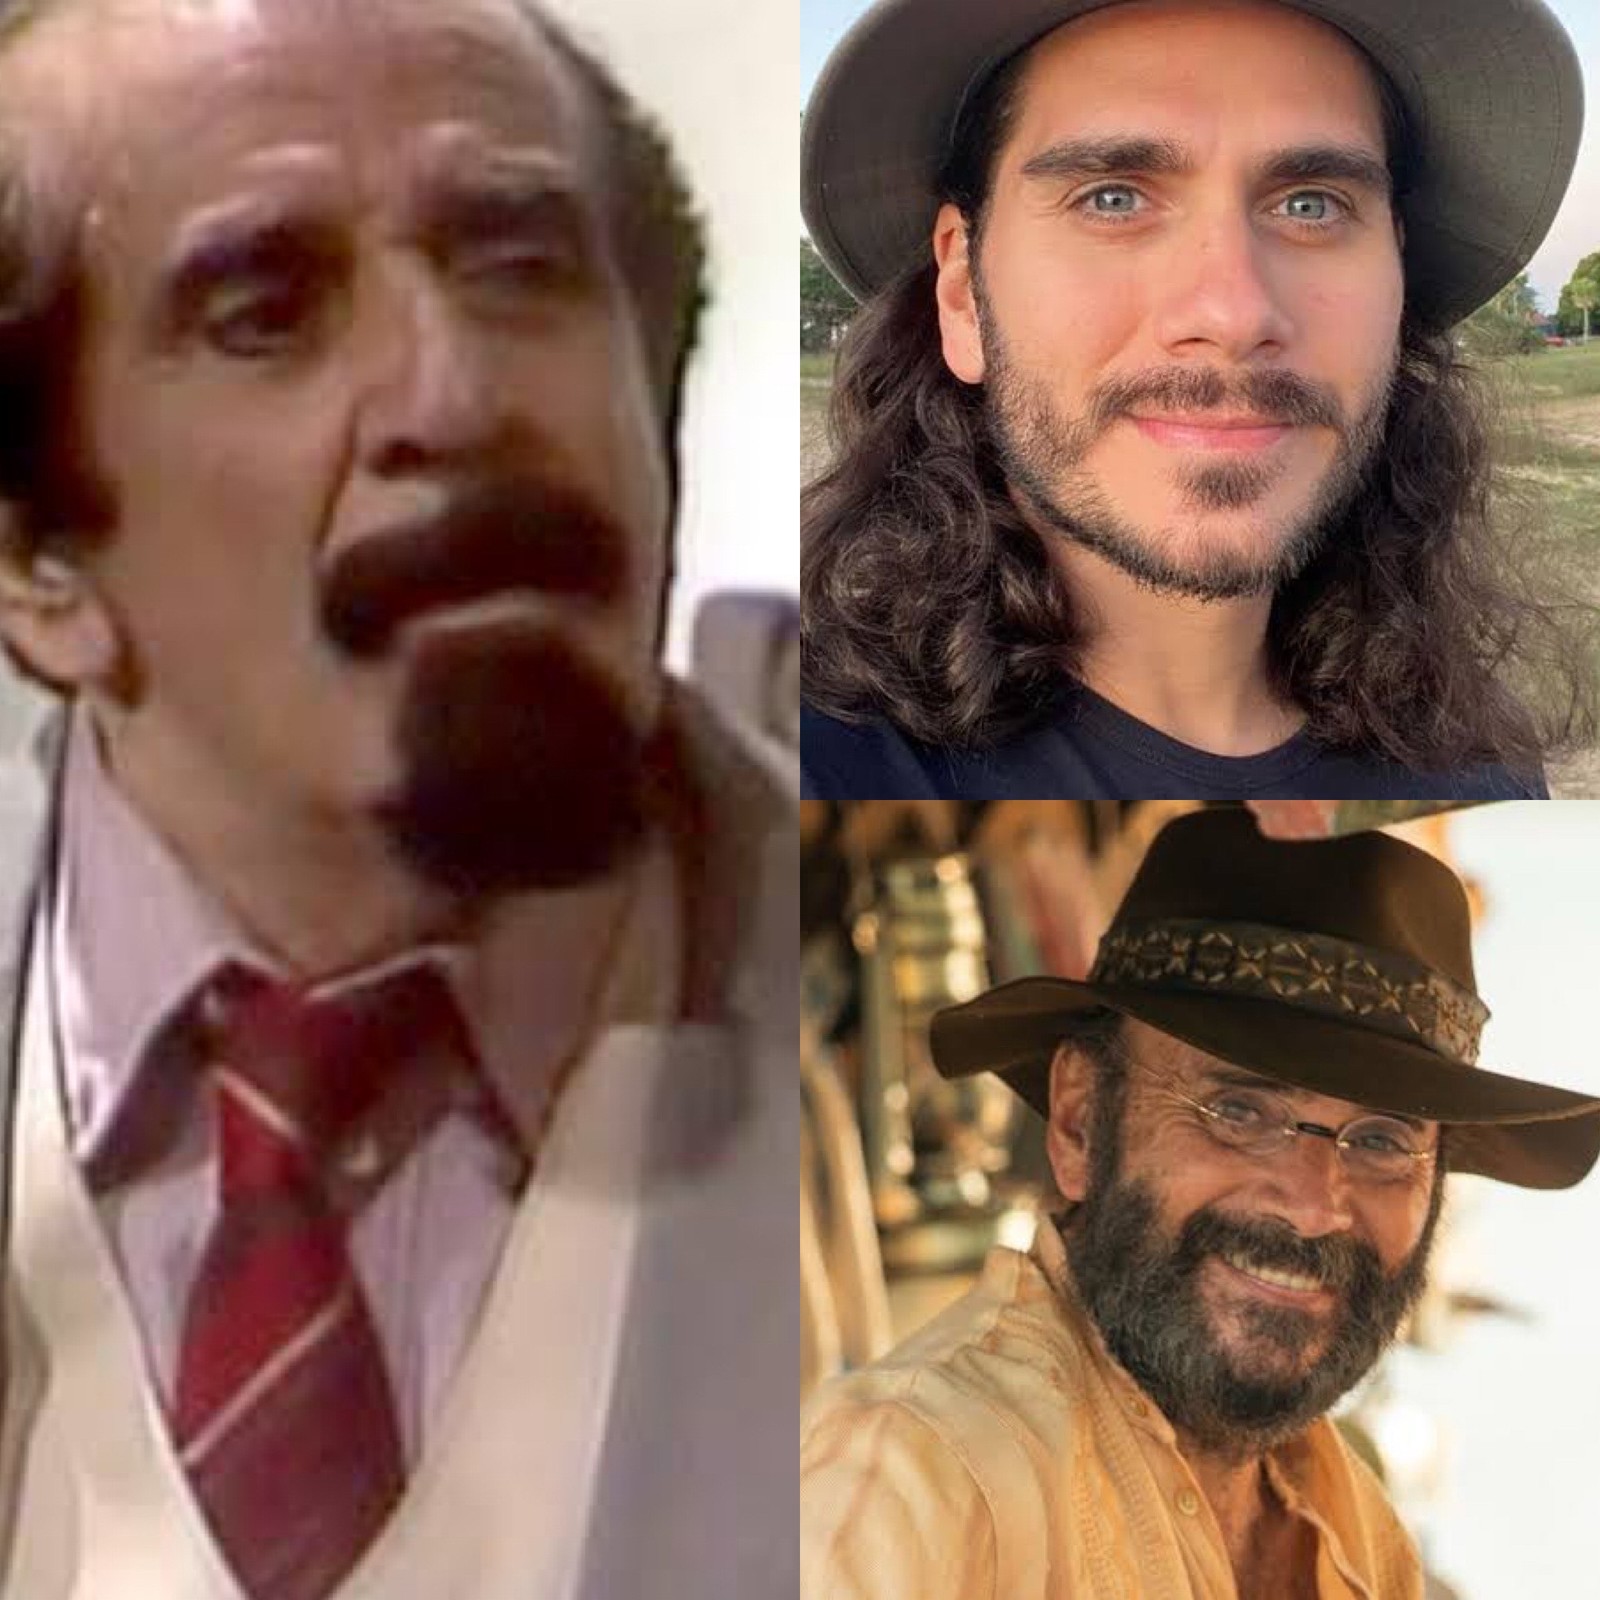 The peddler Rachid, played by Luis Carlos Arutin in the original version, will now be played by Gabriel Sater and Almir Sater respectively in the first and second phases.  The character saves José Inocêncio's life at the beginning of the plot